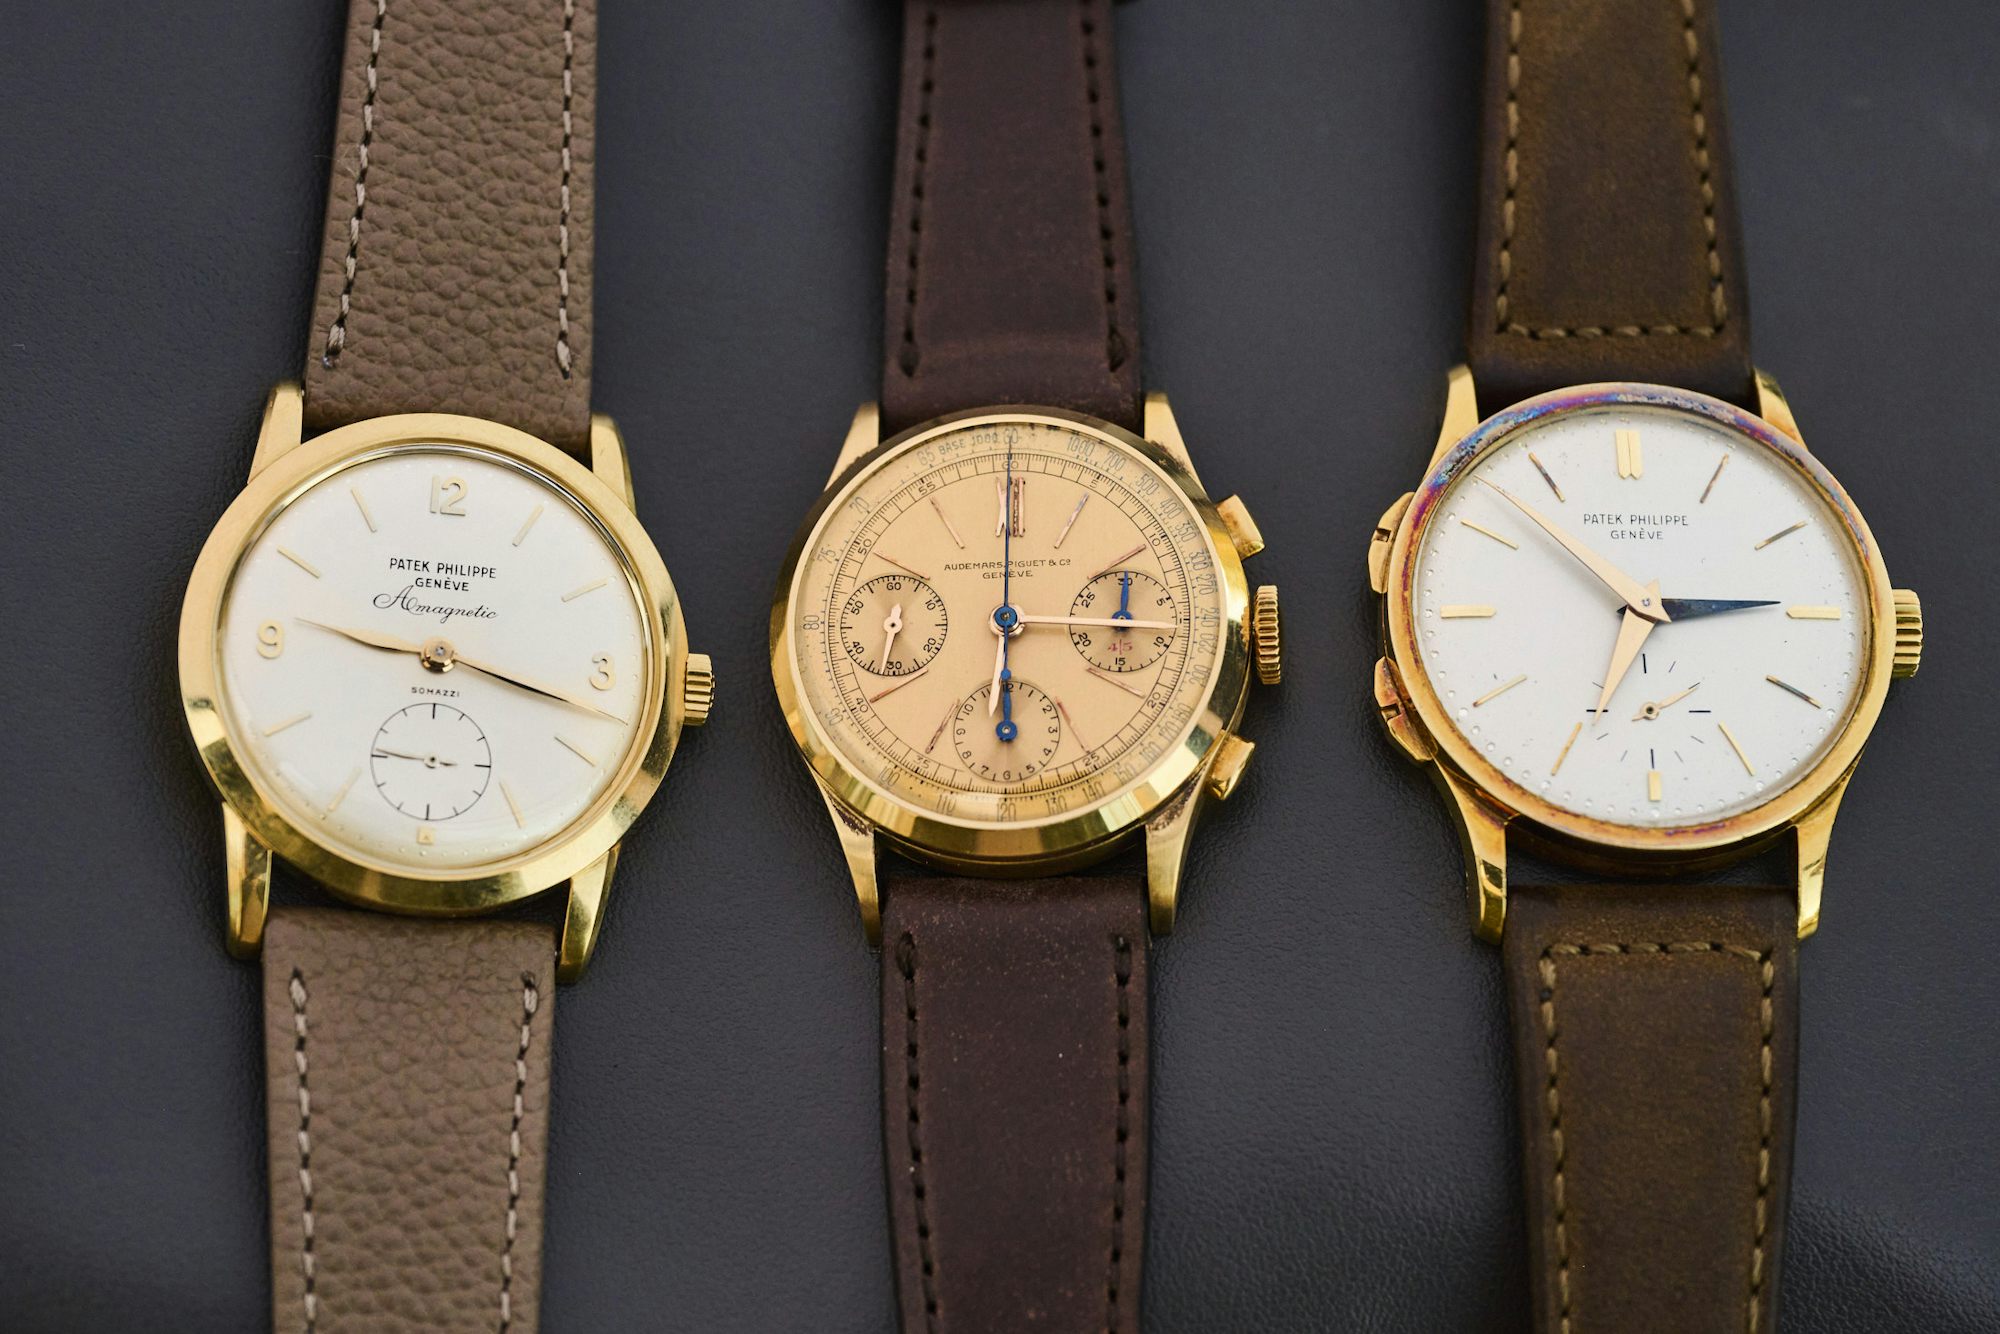 Alessio's watches